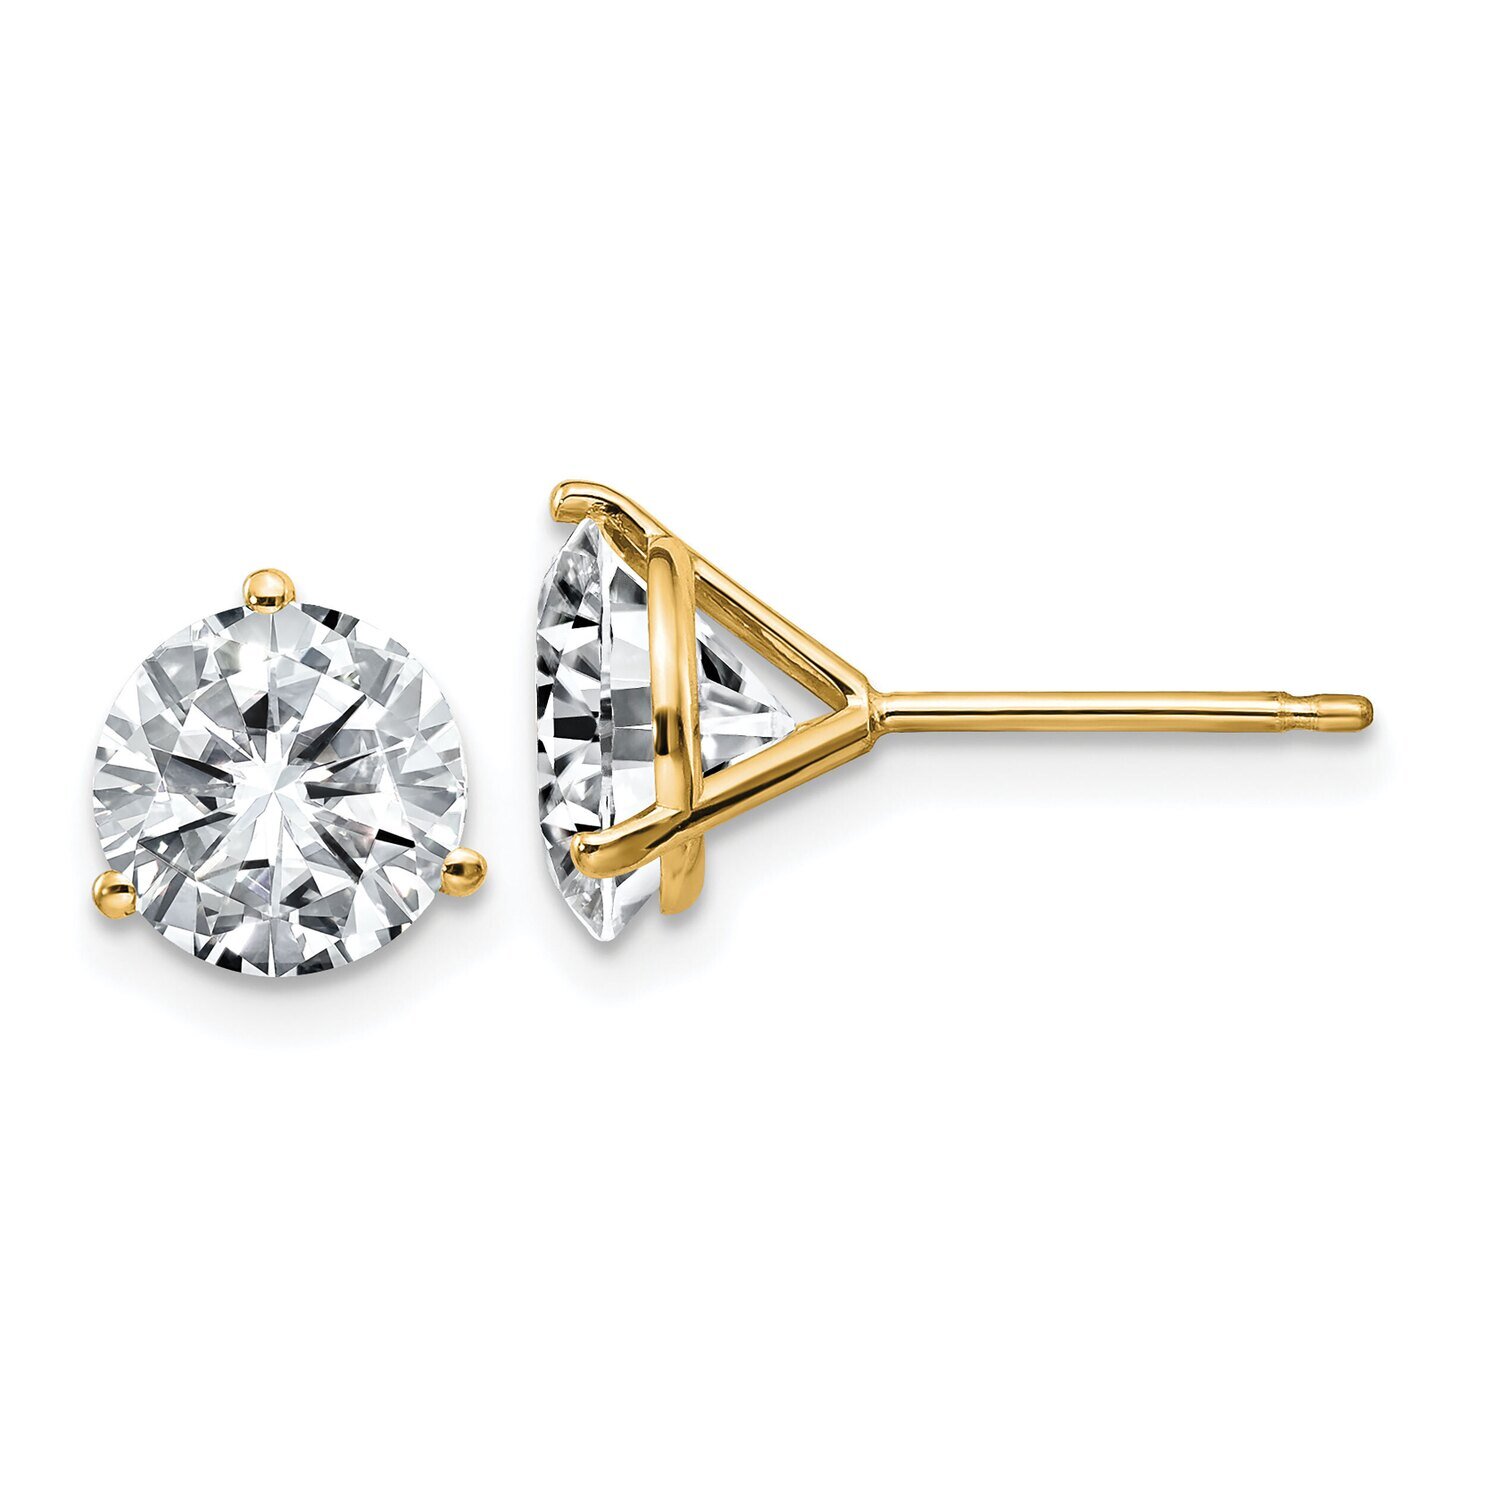 Round 3-Prong 1.25ct. Martini Glass Shape Post Earring Mounting 14k Yellow Gold YG322-10MT